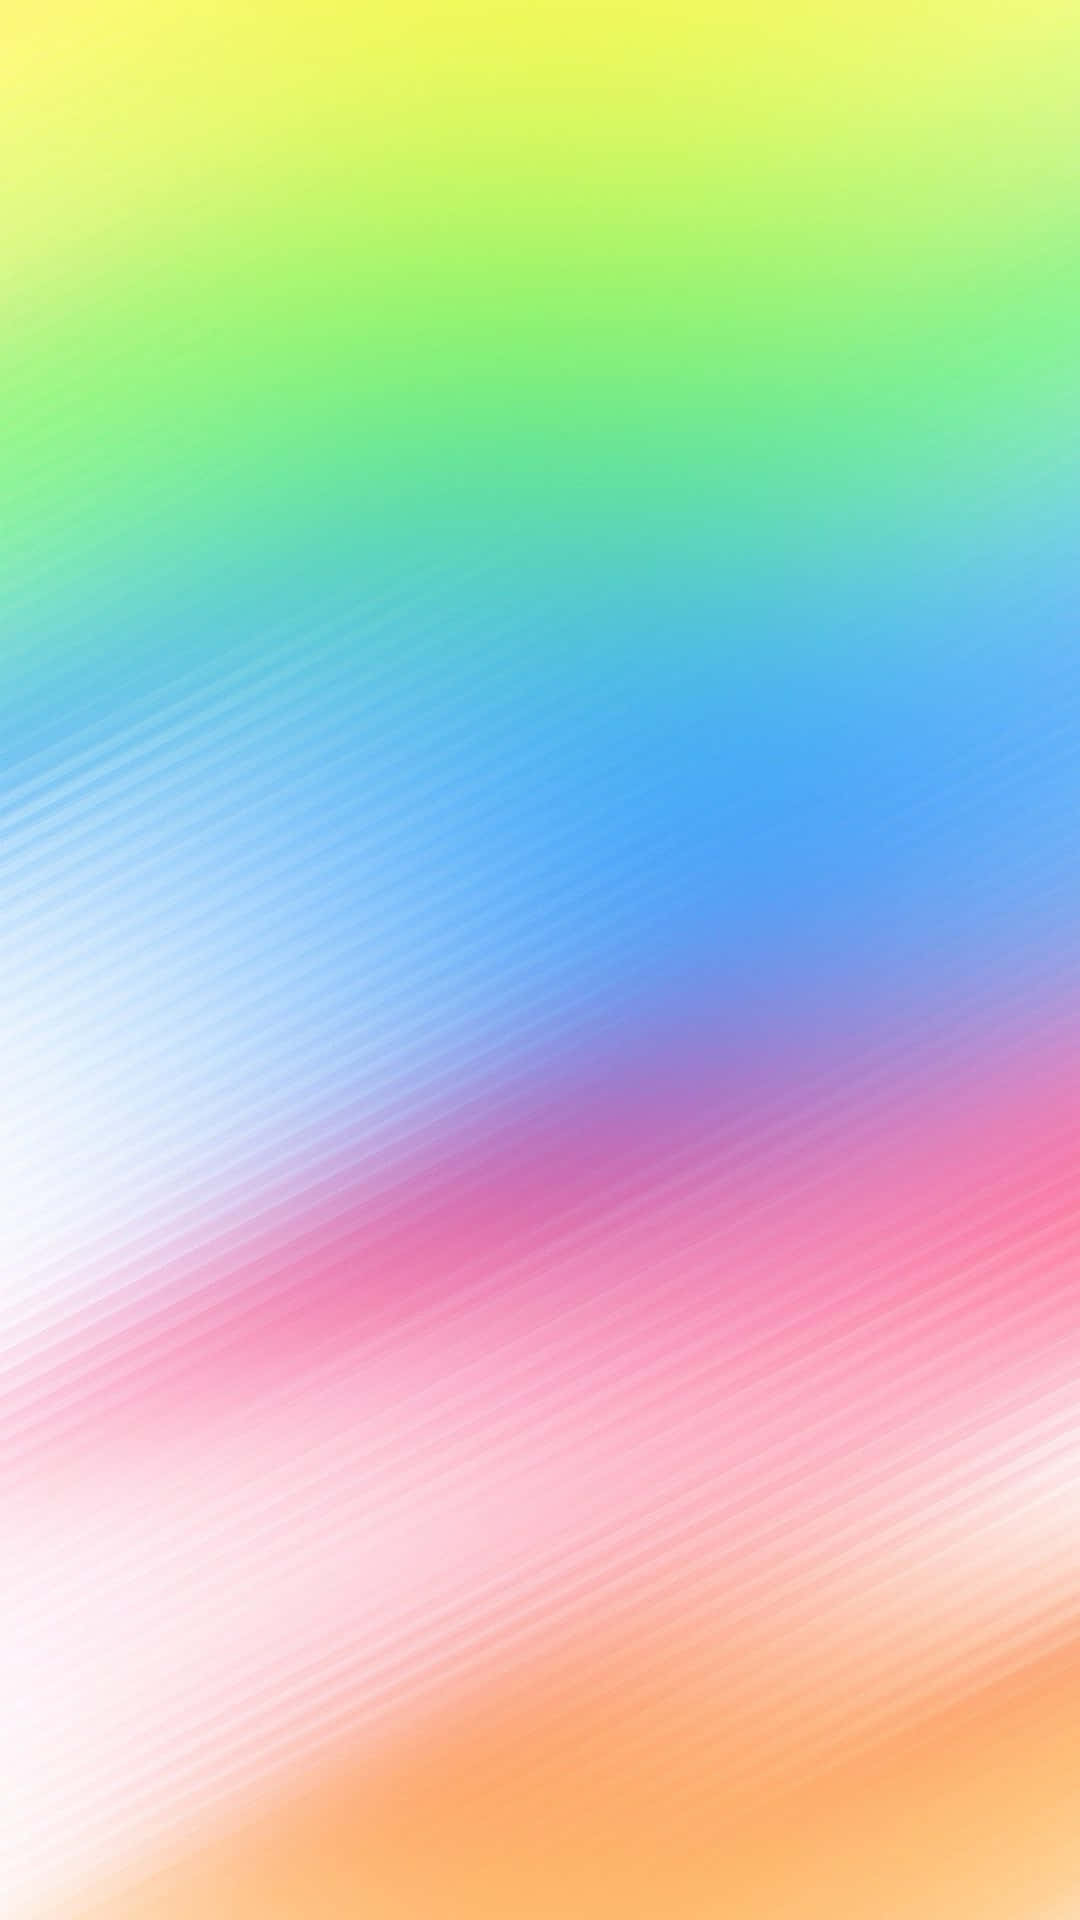 Unleash your creativity with this rainbow-bright phone Wallpaper